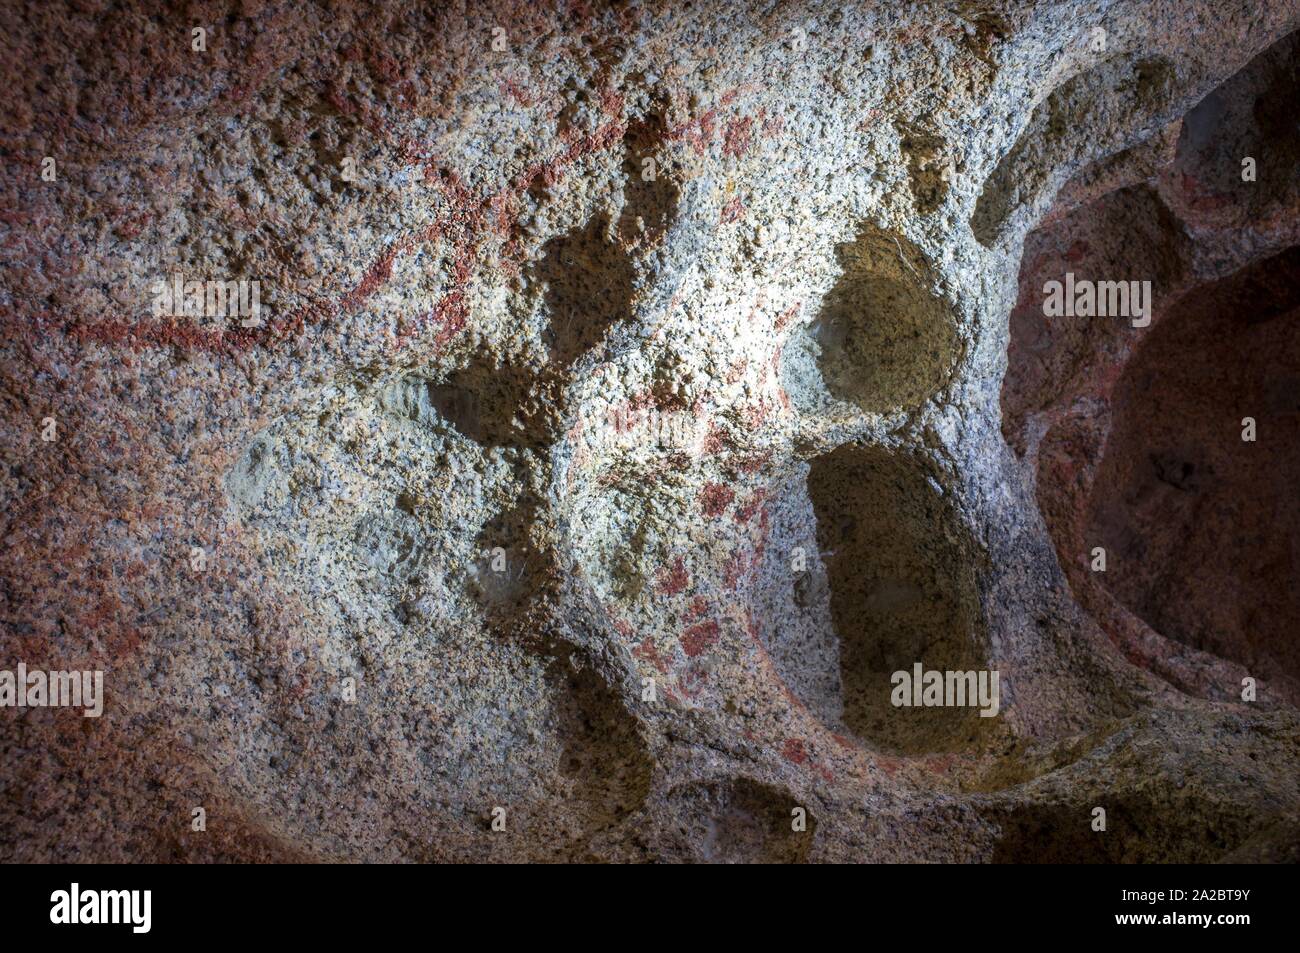 Prehistoric schematic paintings inside granite boulder at Natural Monument of Los Barruecos, Extremadura, Spain. Branch-shaped and dotted paintings. Stock Photo